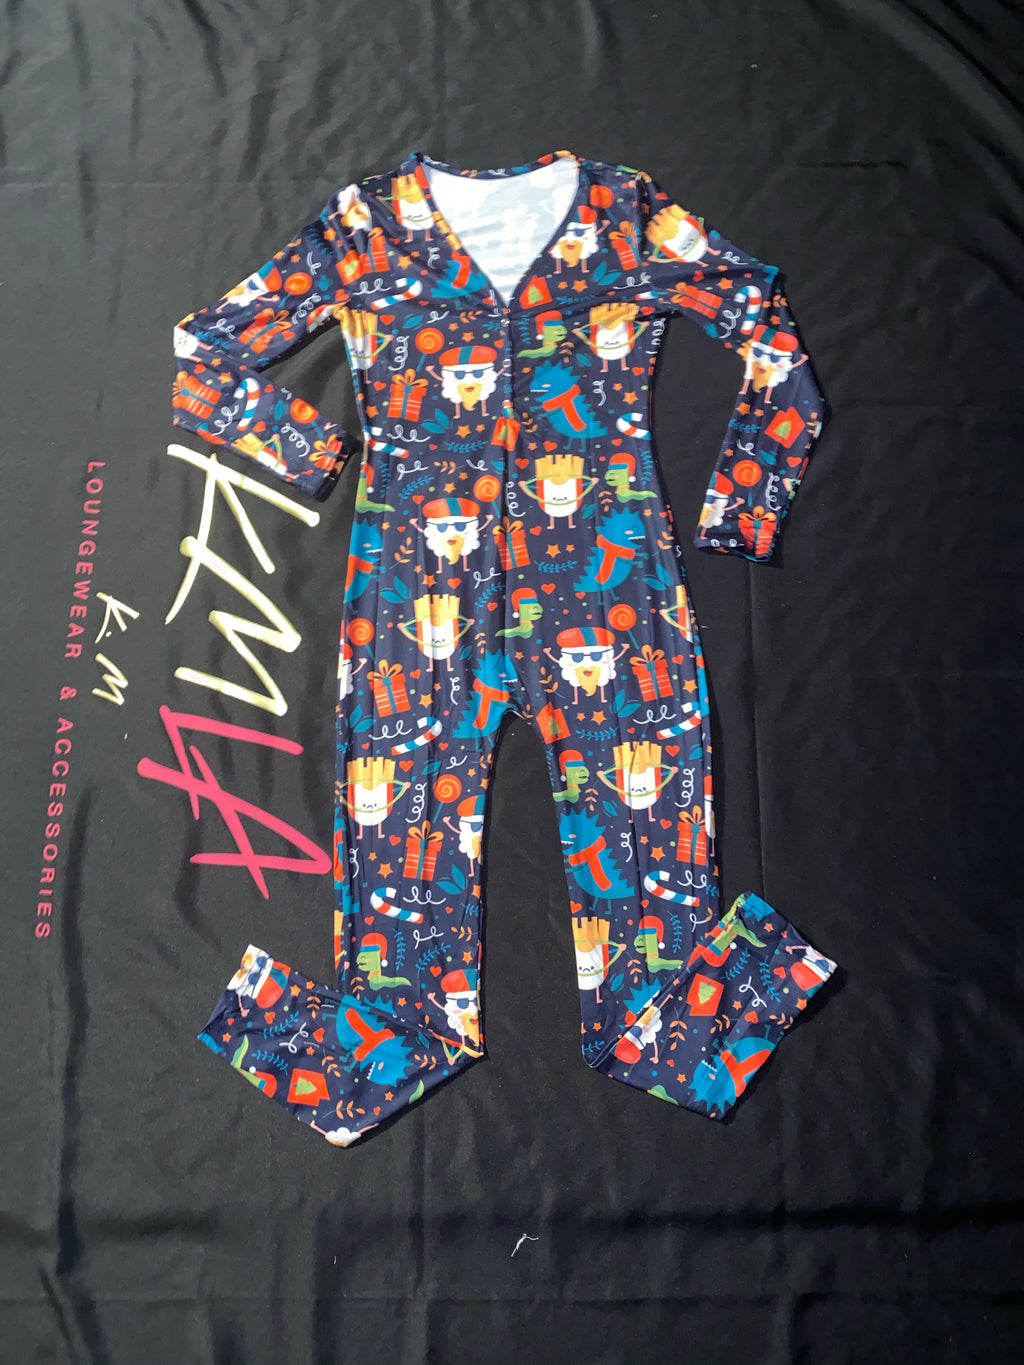 Headed over to do that thang he like – KM Loungewear & Accessories